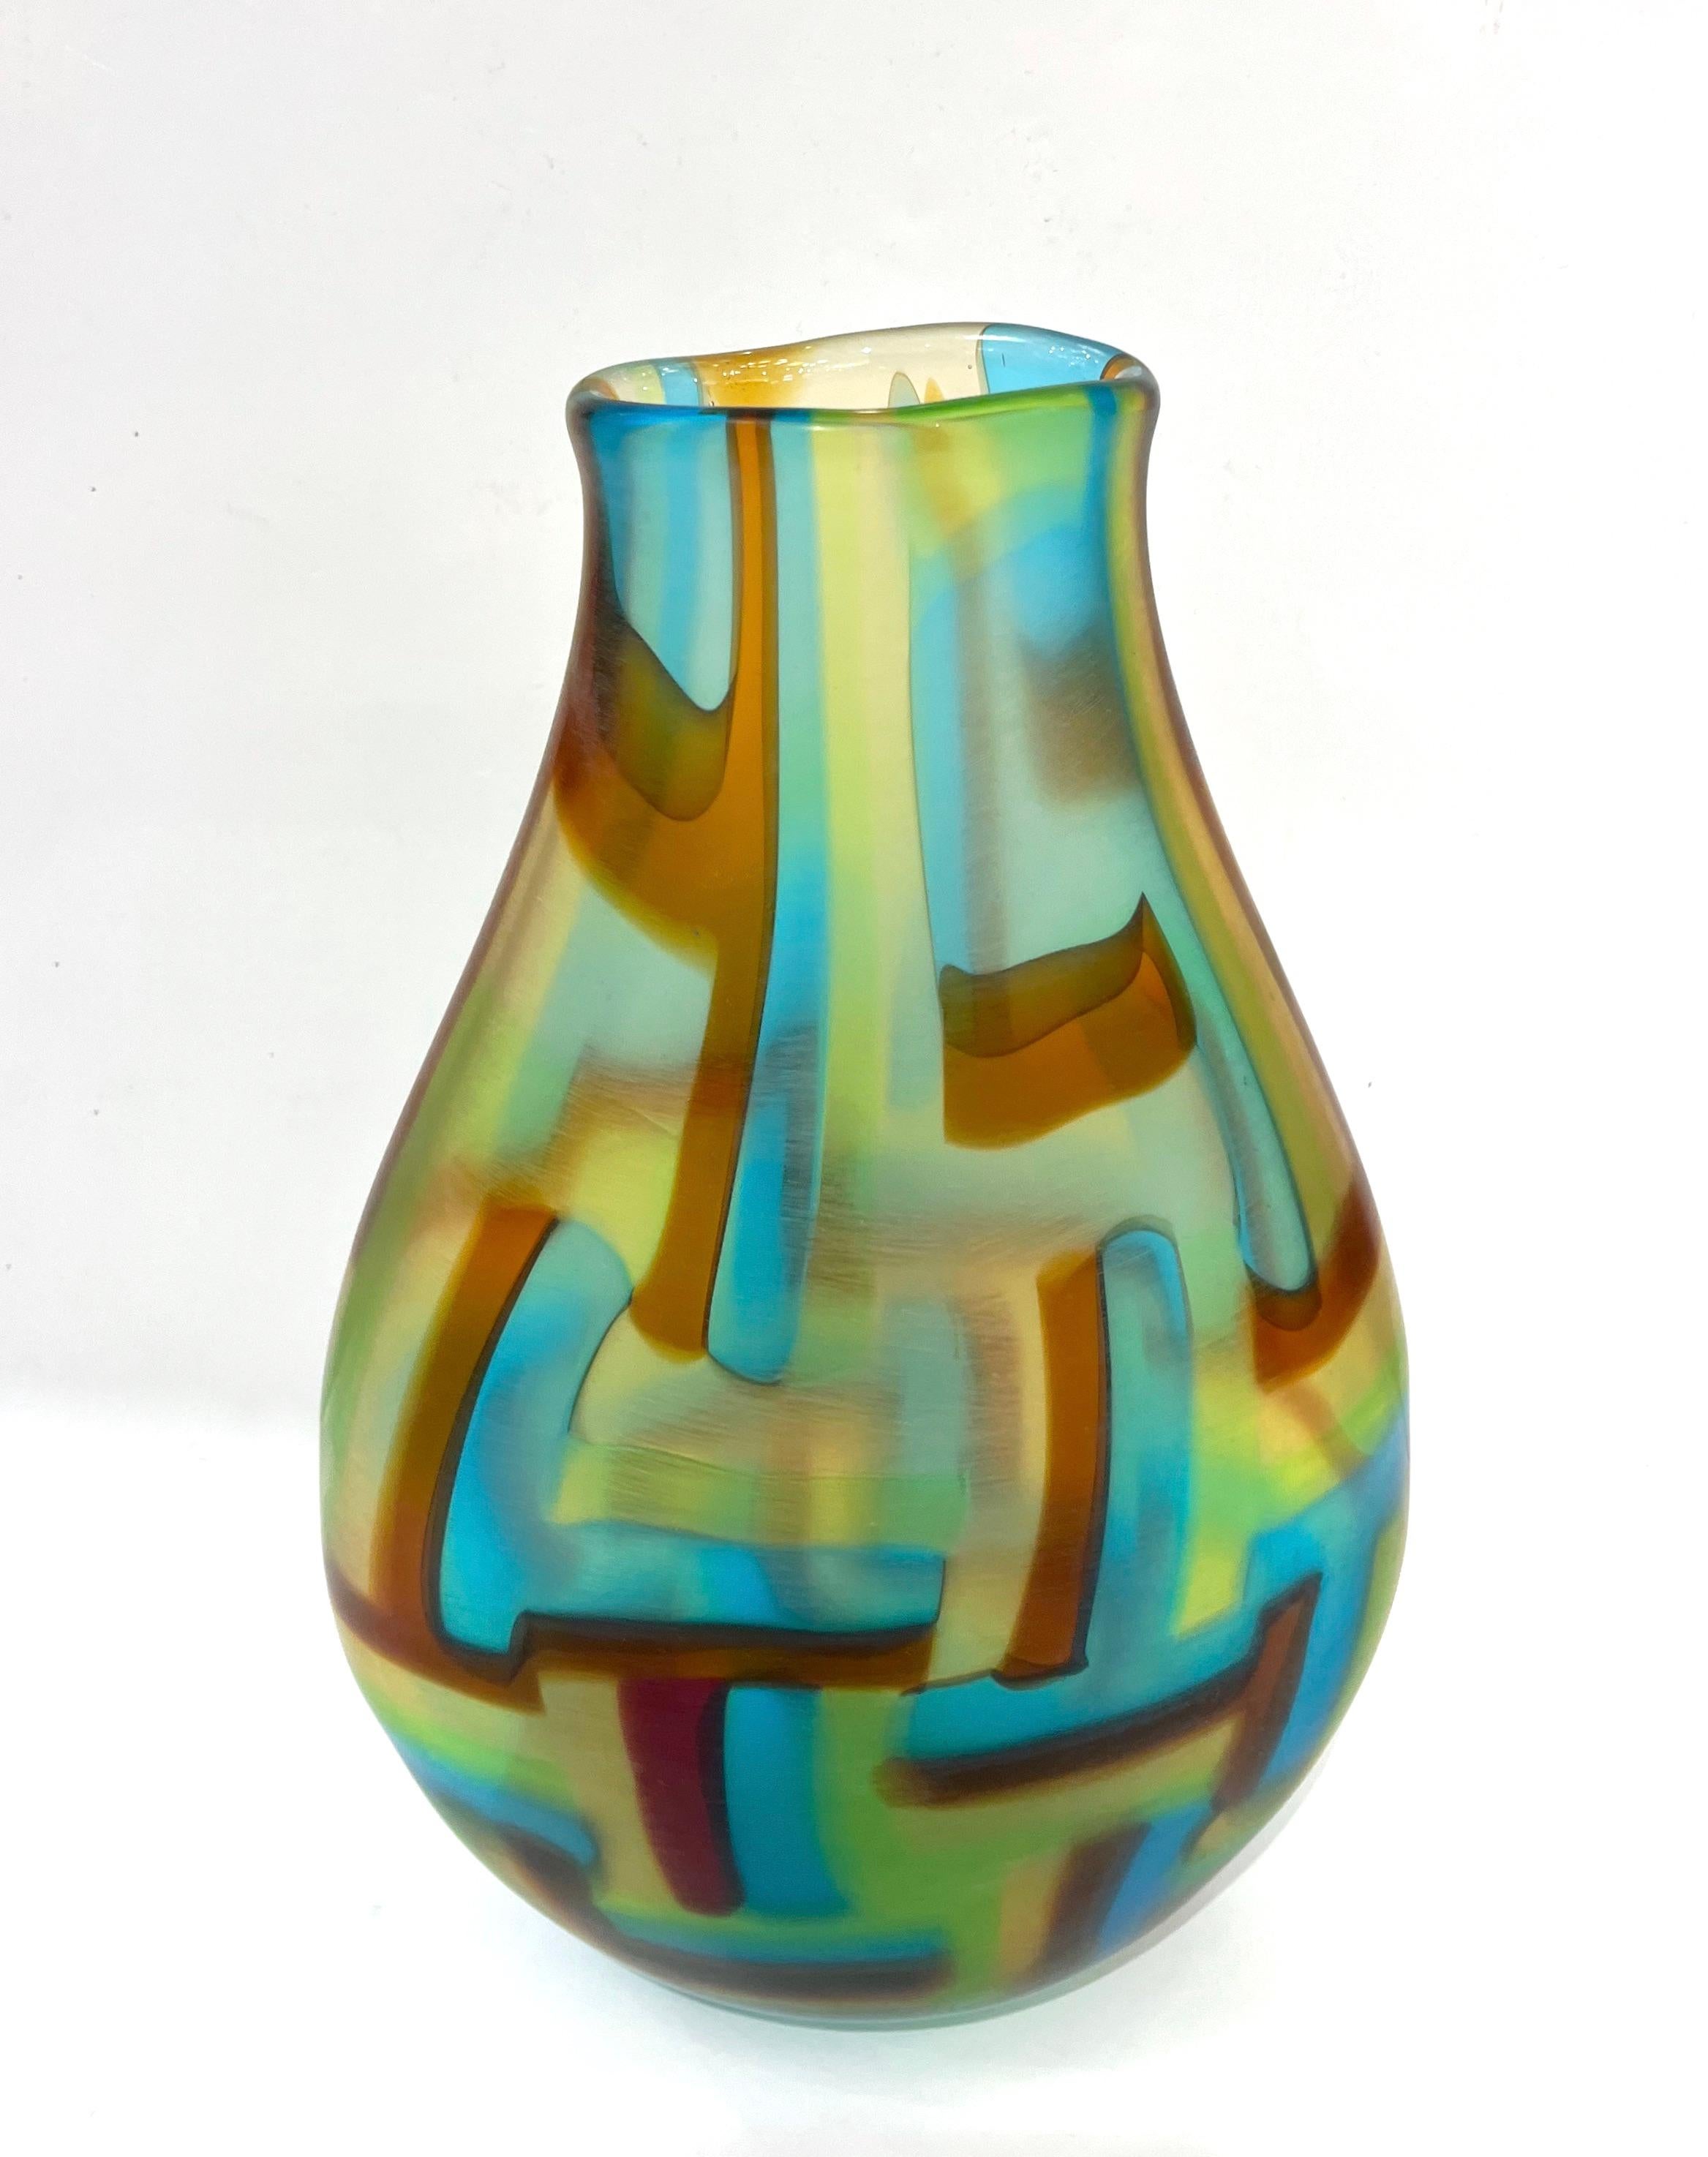 Contemporary Afro Celotto Early 2000s Italian Turquoise Yellow Green Amber Murano Glass Vase For Sale